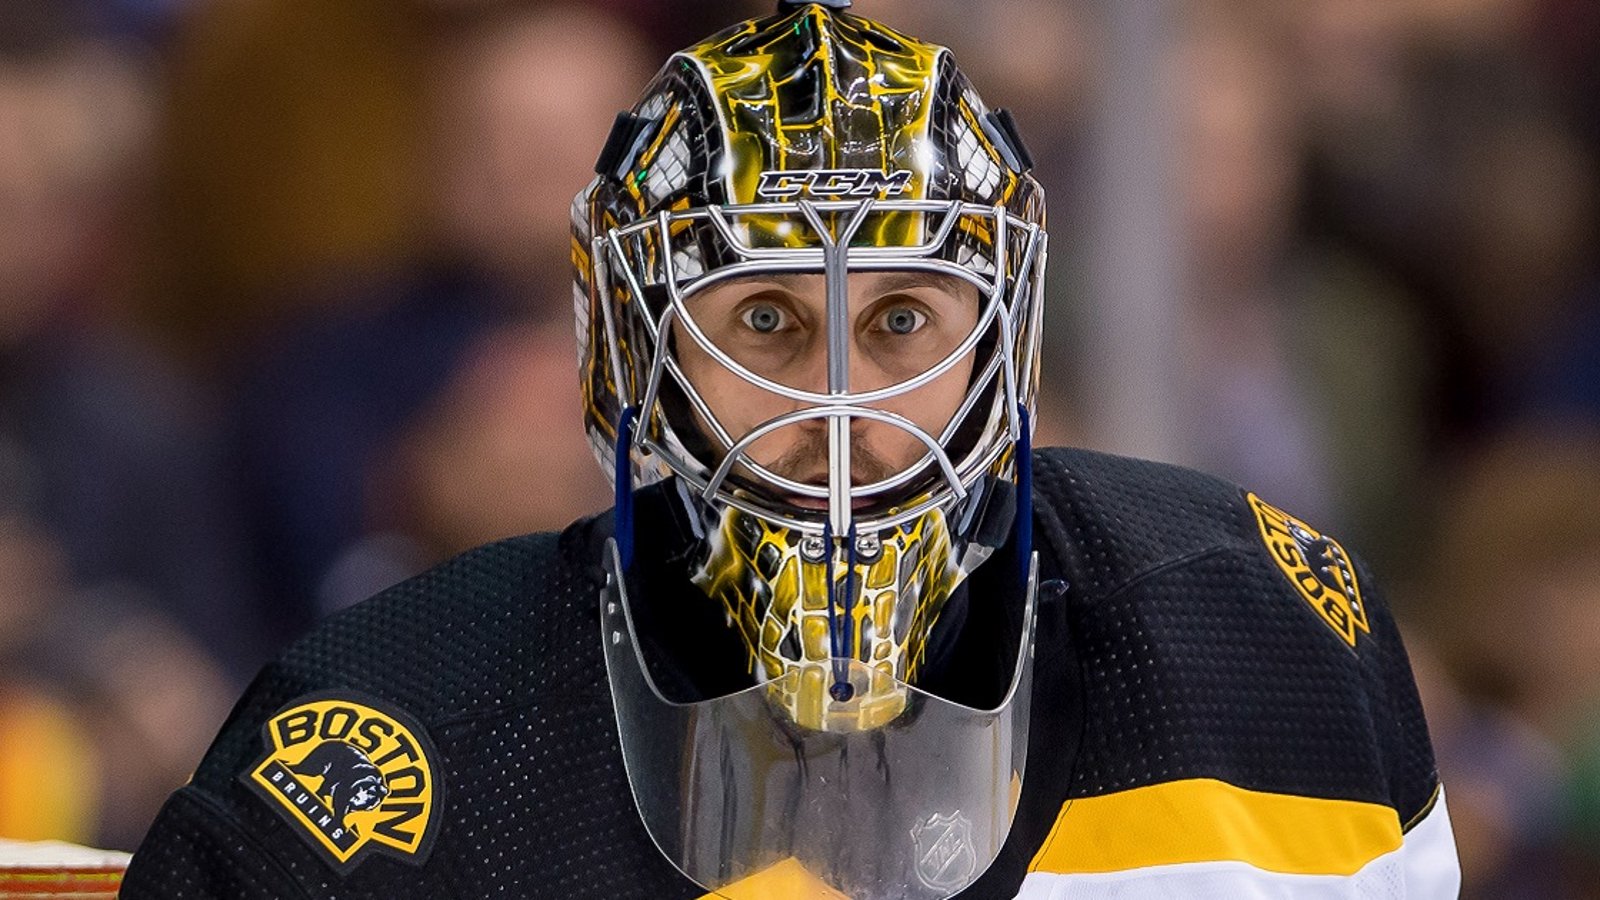 Coronavirus played a role in Halak re-signing with the Bruins.